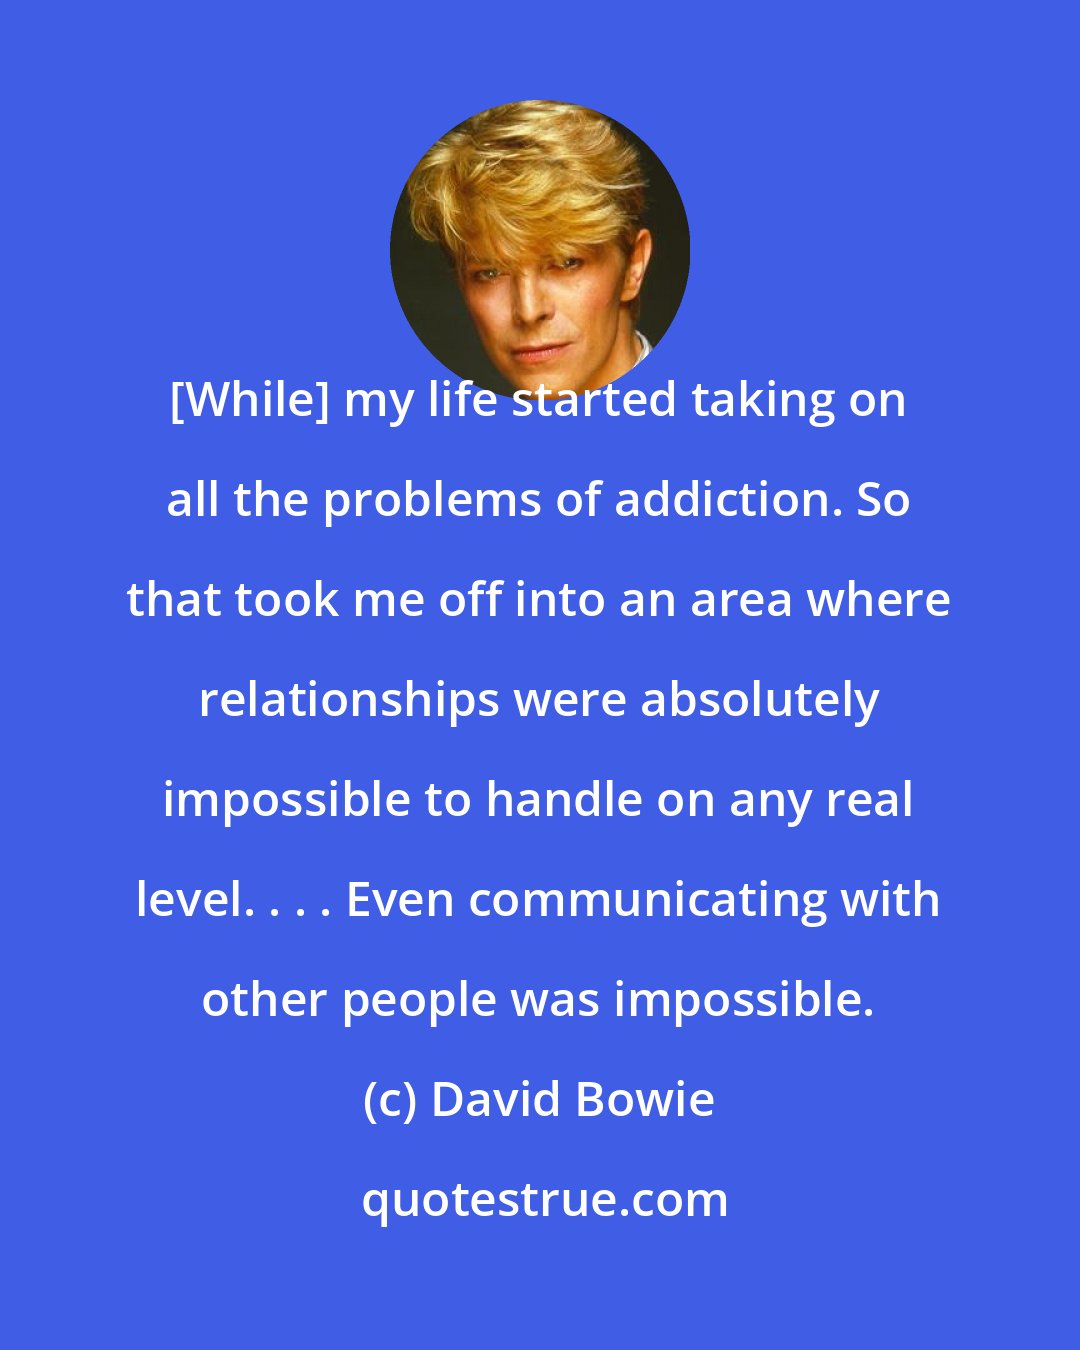 David Bowie: [While] my life started taking on all the problems of addiction. So that took me off into an area where relationships were absolutely impossible to handle on any real level. . . . Even communicating with other people was impossible.